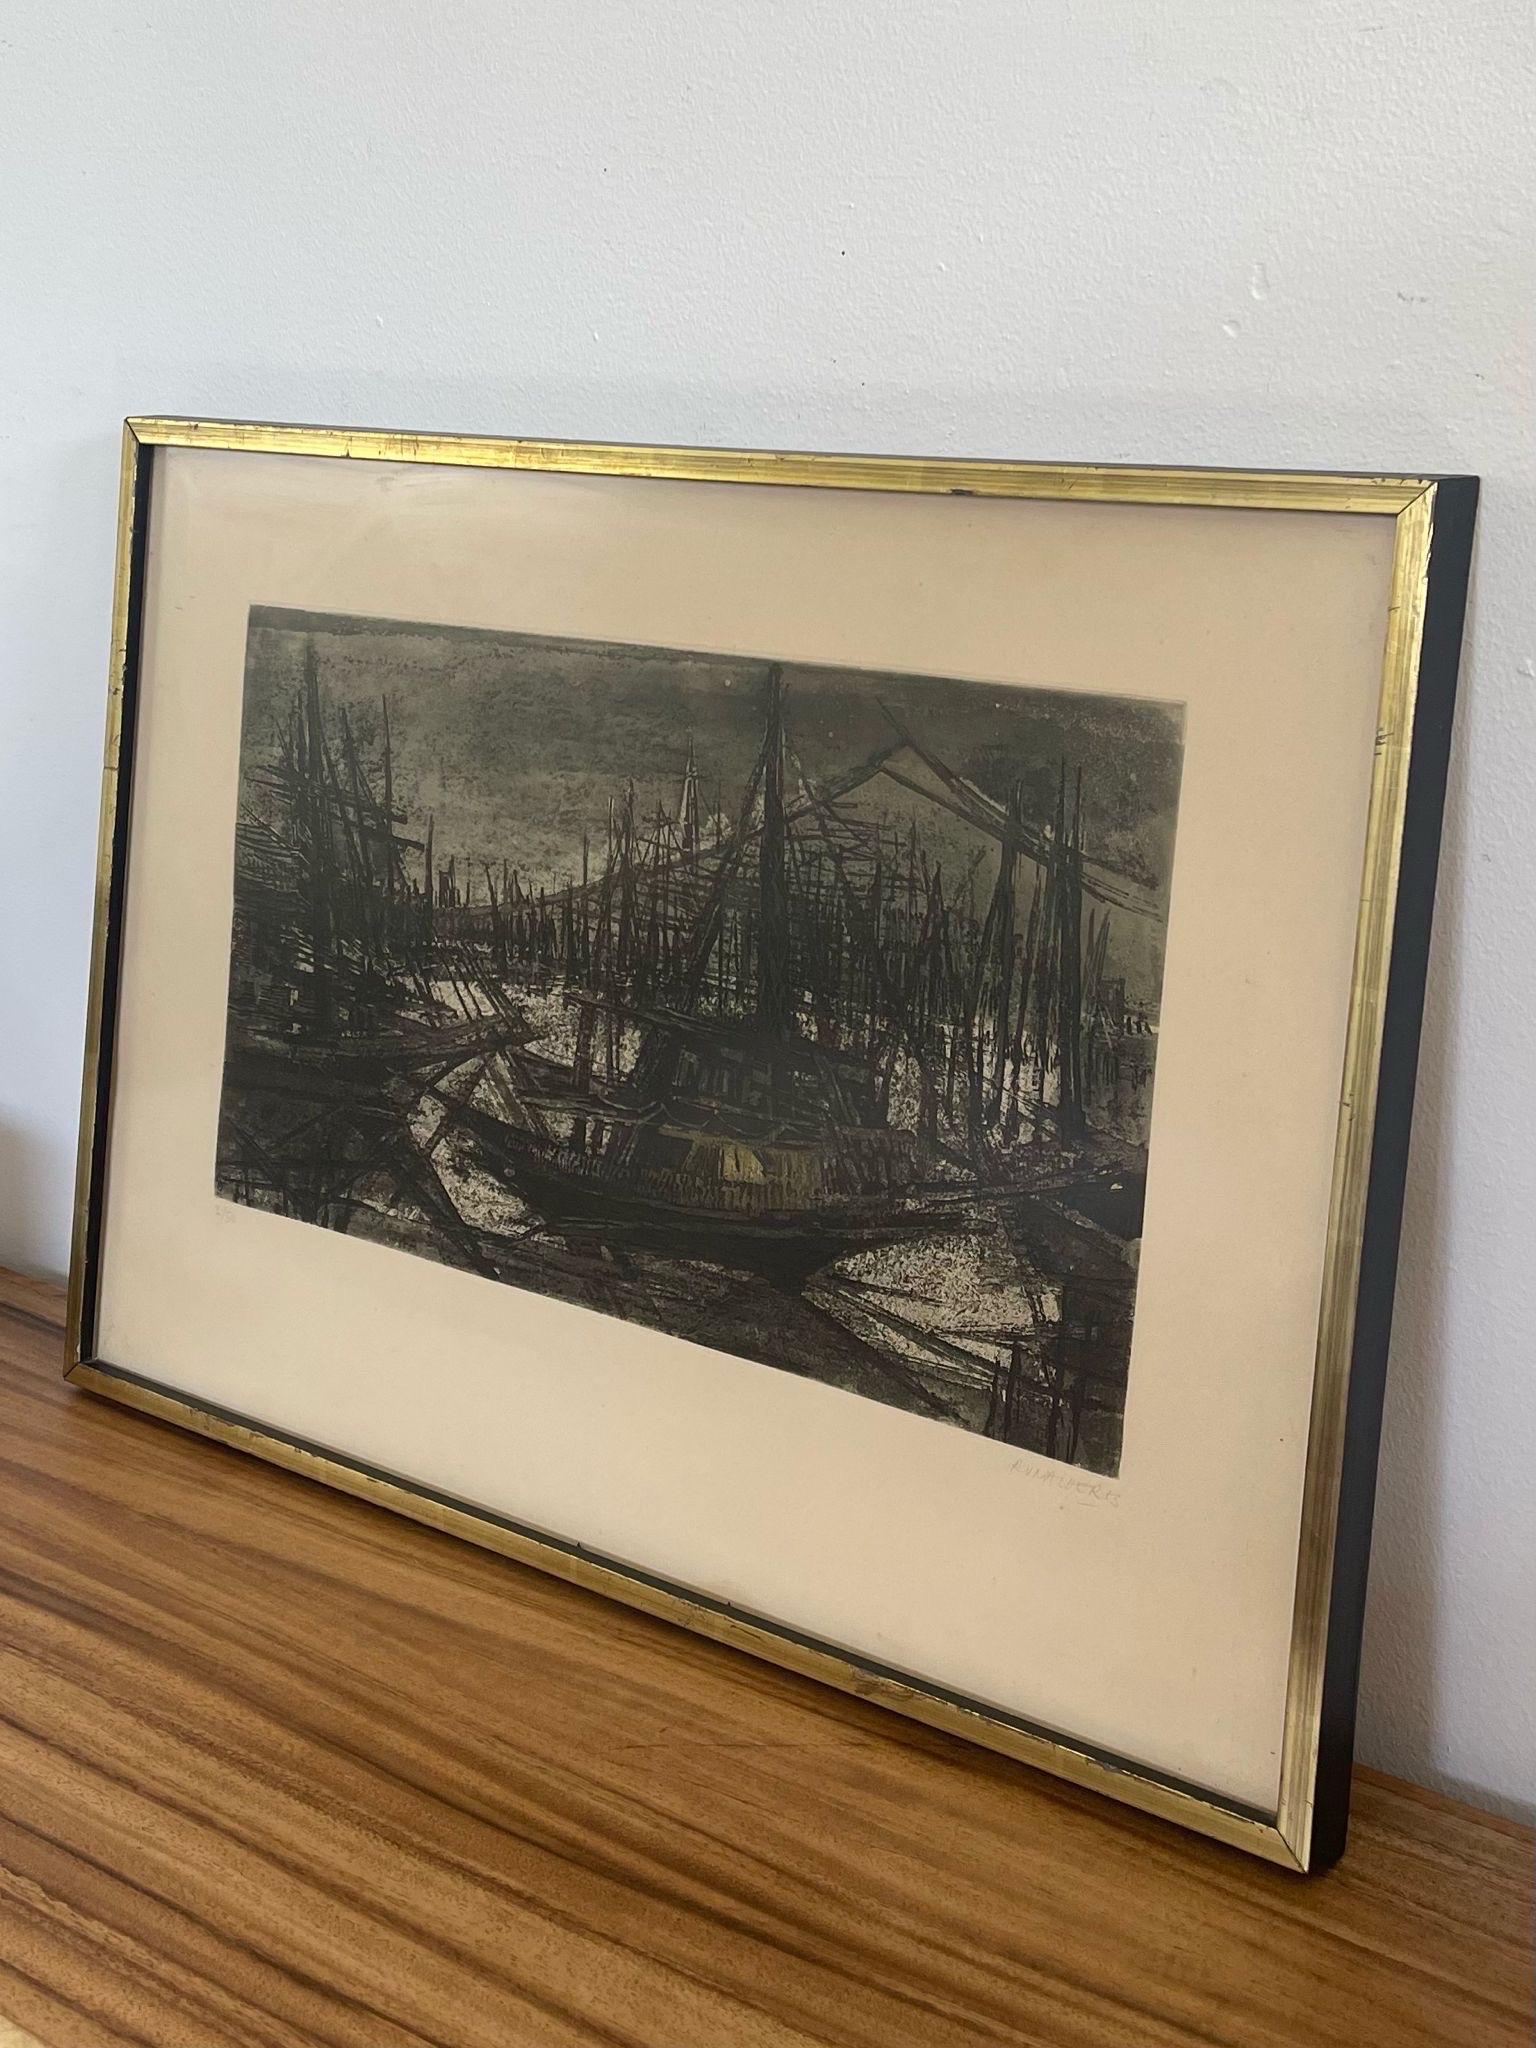 Vintage Signed and Framed Etching Print by Suzanne Rauacher of Abstract sailboat In Good Condition For Sale In Seattle, WA